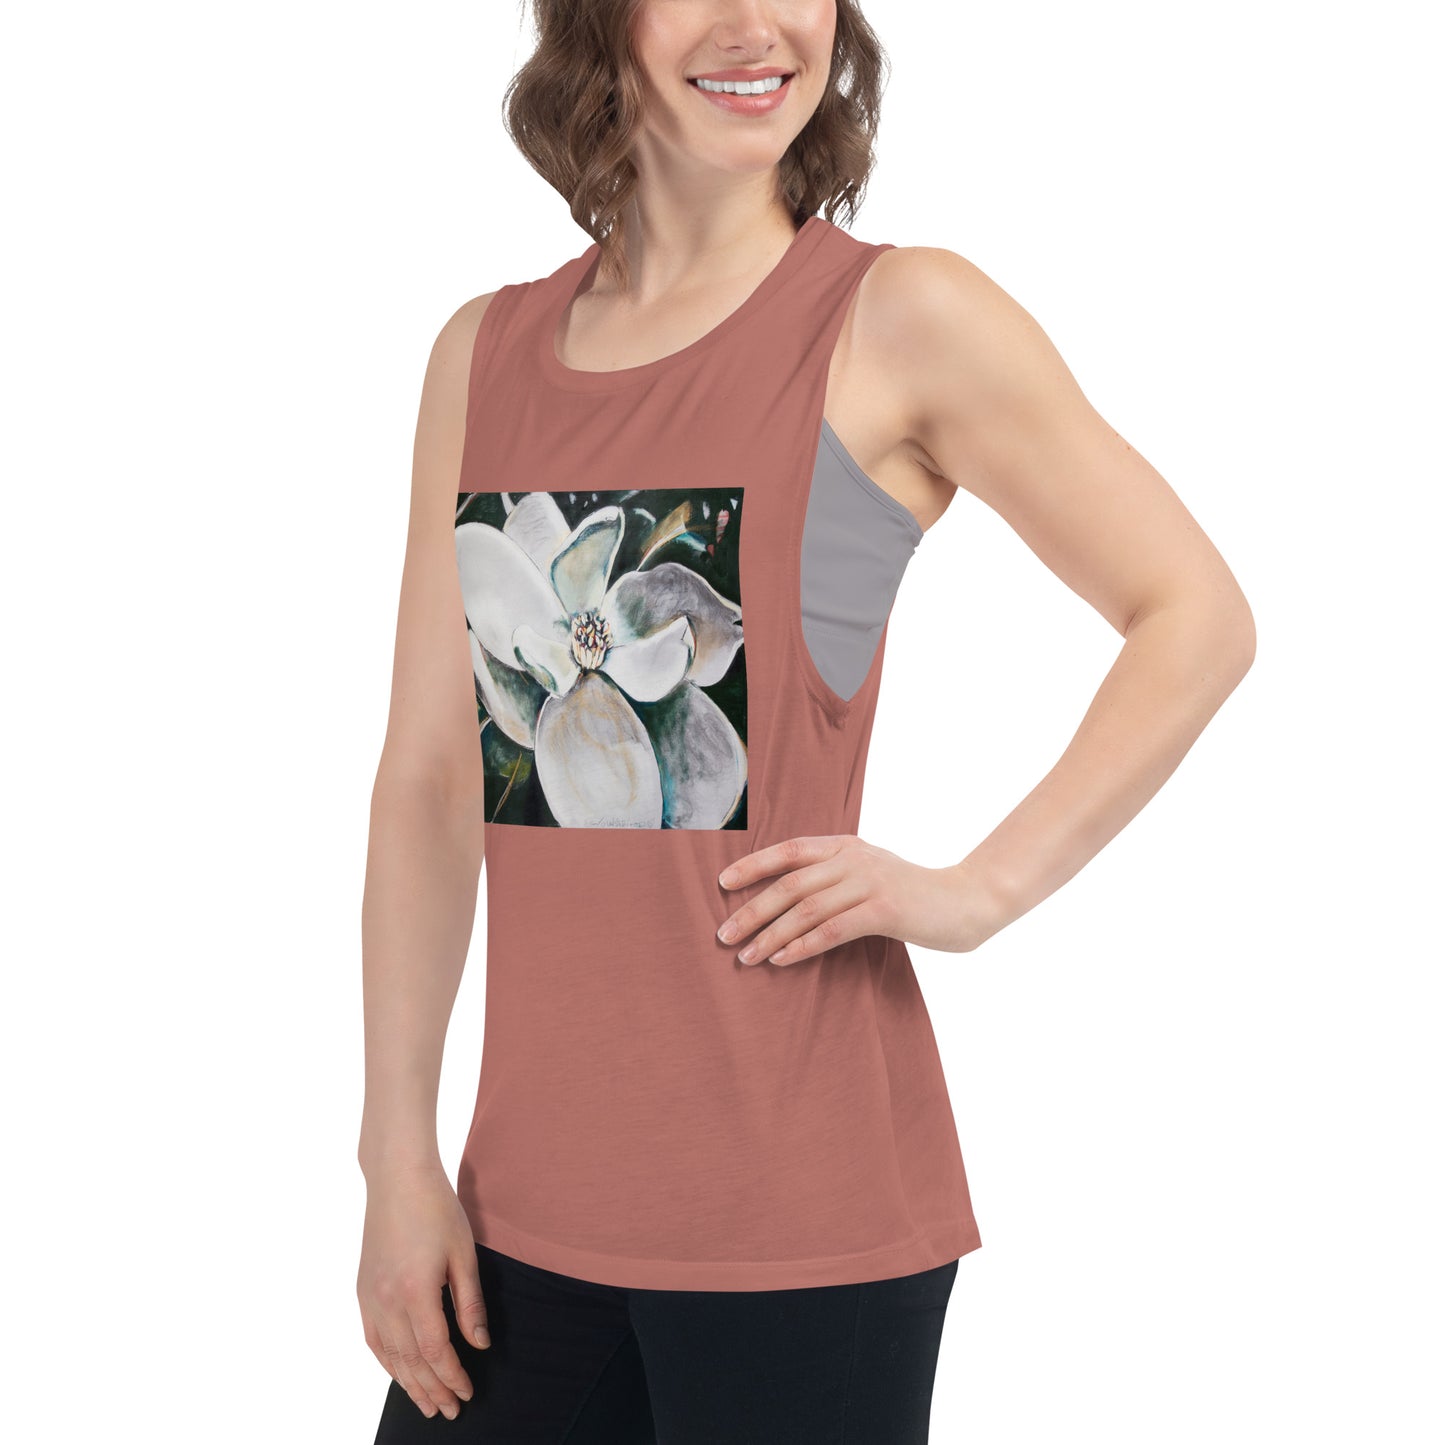 Magnolia with Her Heart Open Ladies’ Muscle Tank